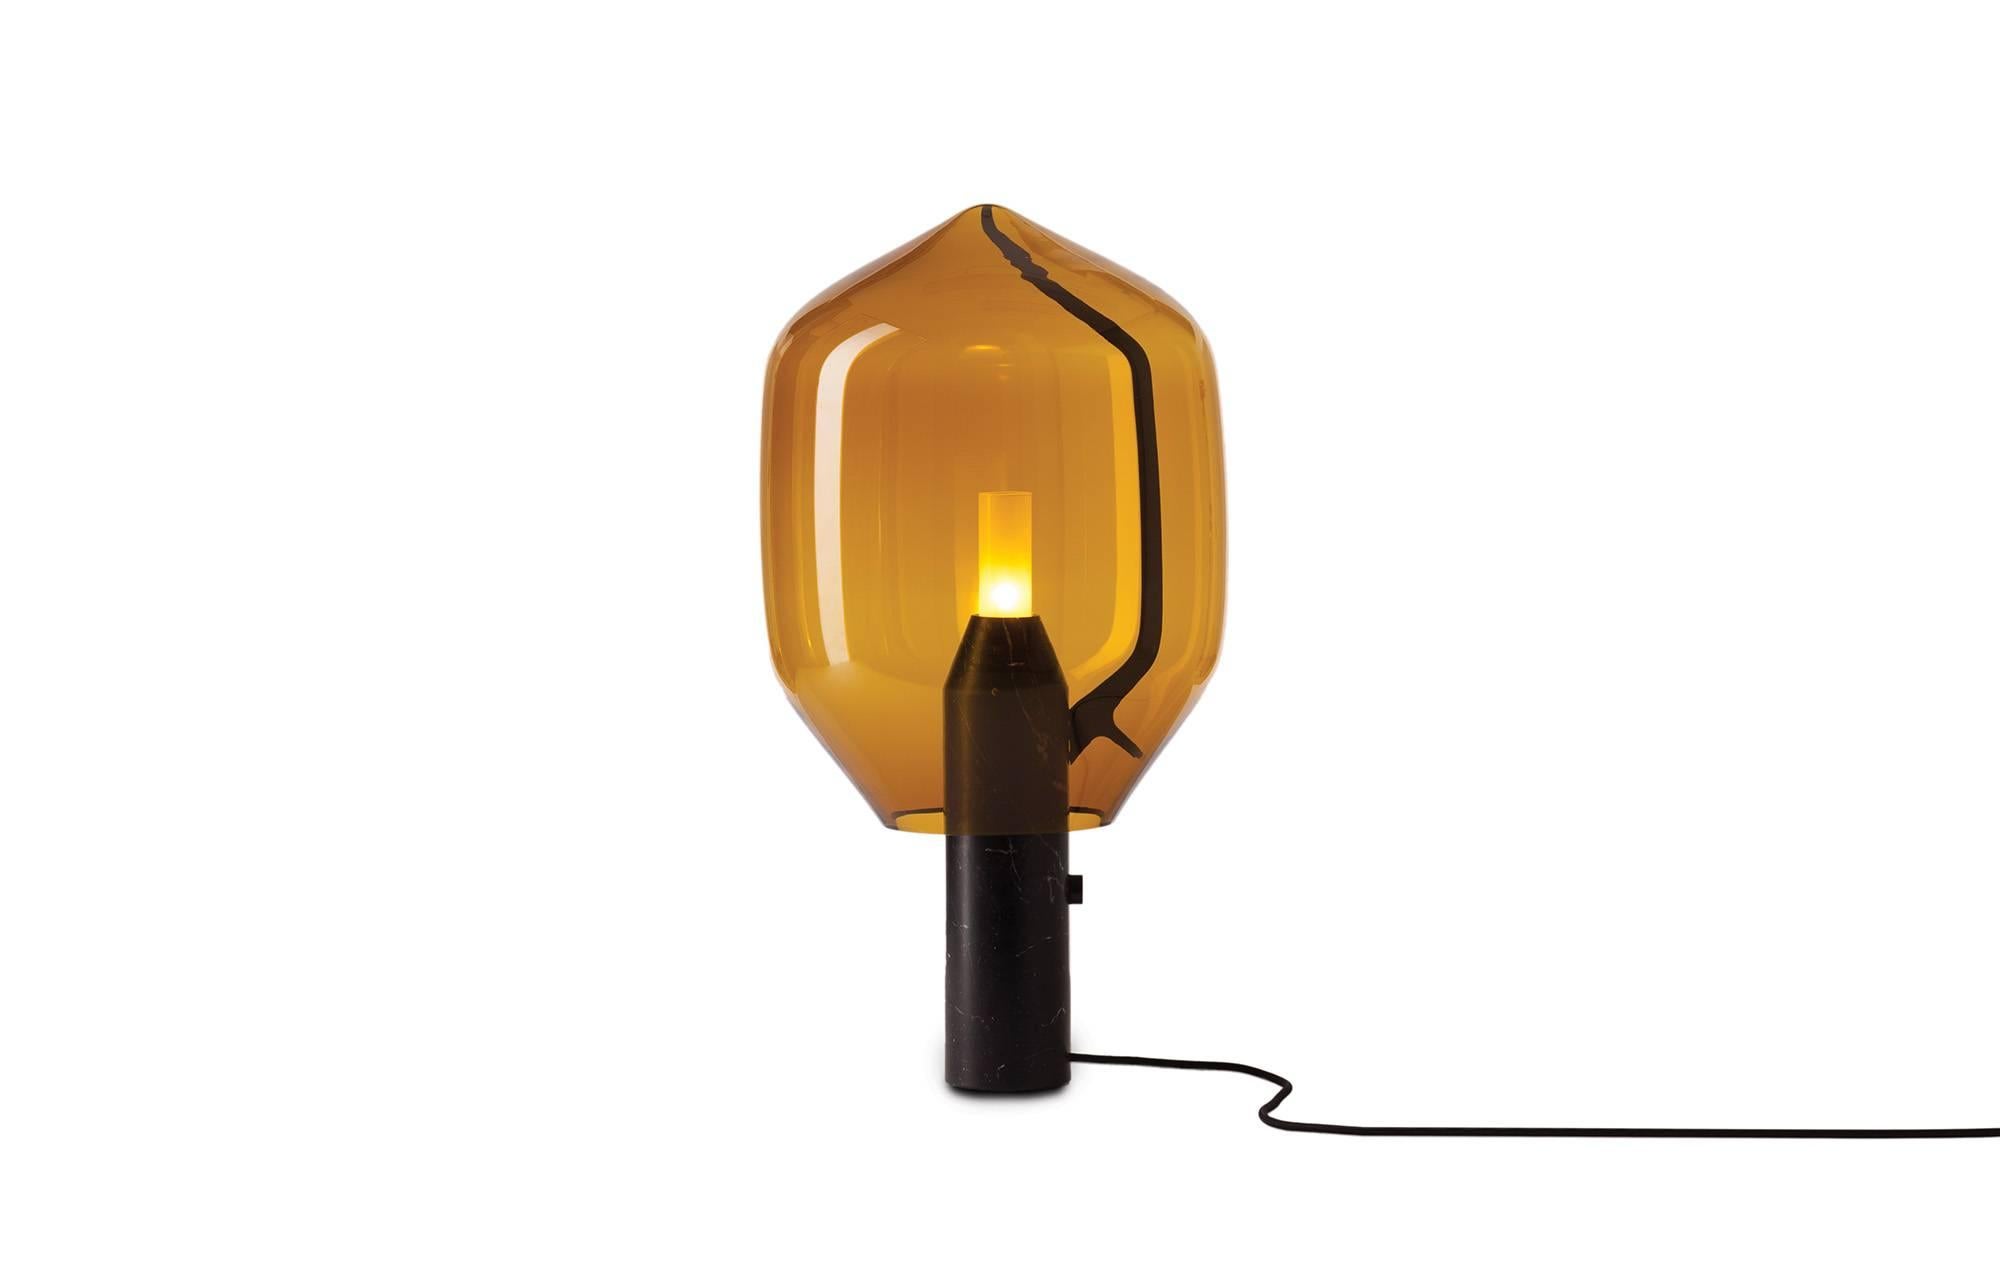 The Lighthouse table lamp comes with a honed black Marquina marble or Carrara marble base and the shade in amber or grey glass. 

An elegant equation of modern and traditional craftsmanship, the Lighthouse balances a Venetian mouth blown glass